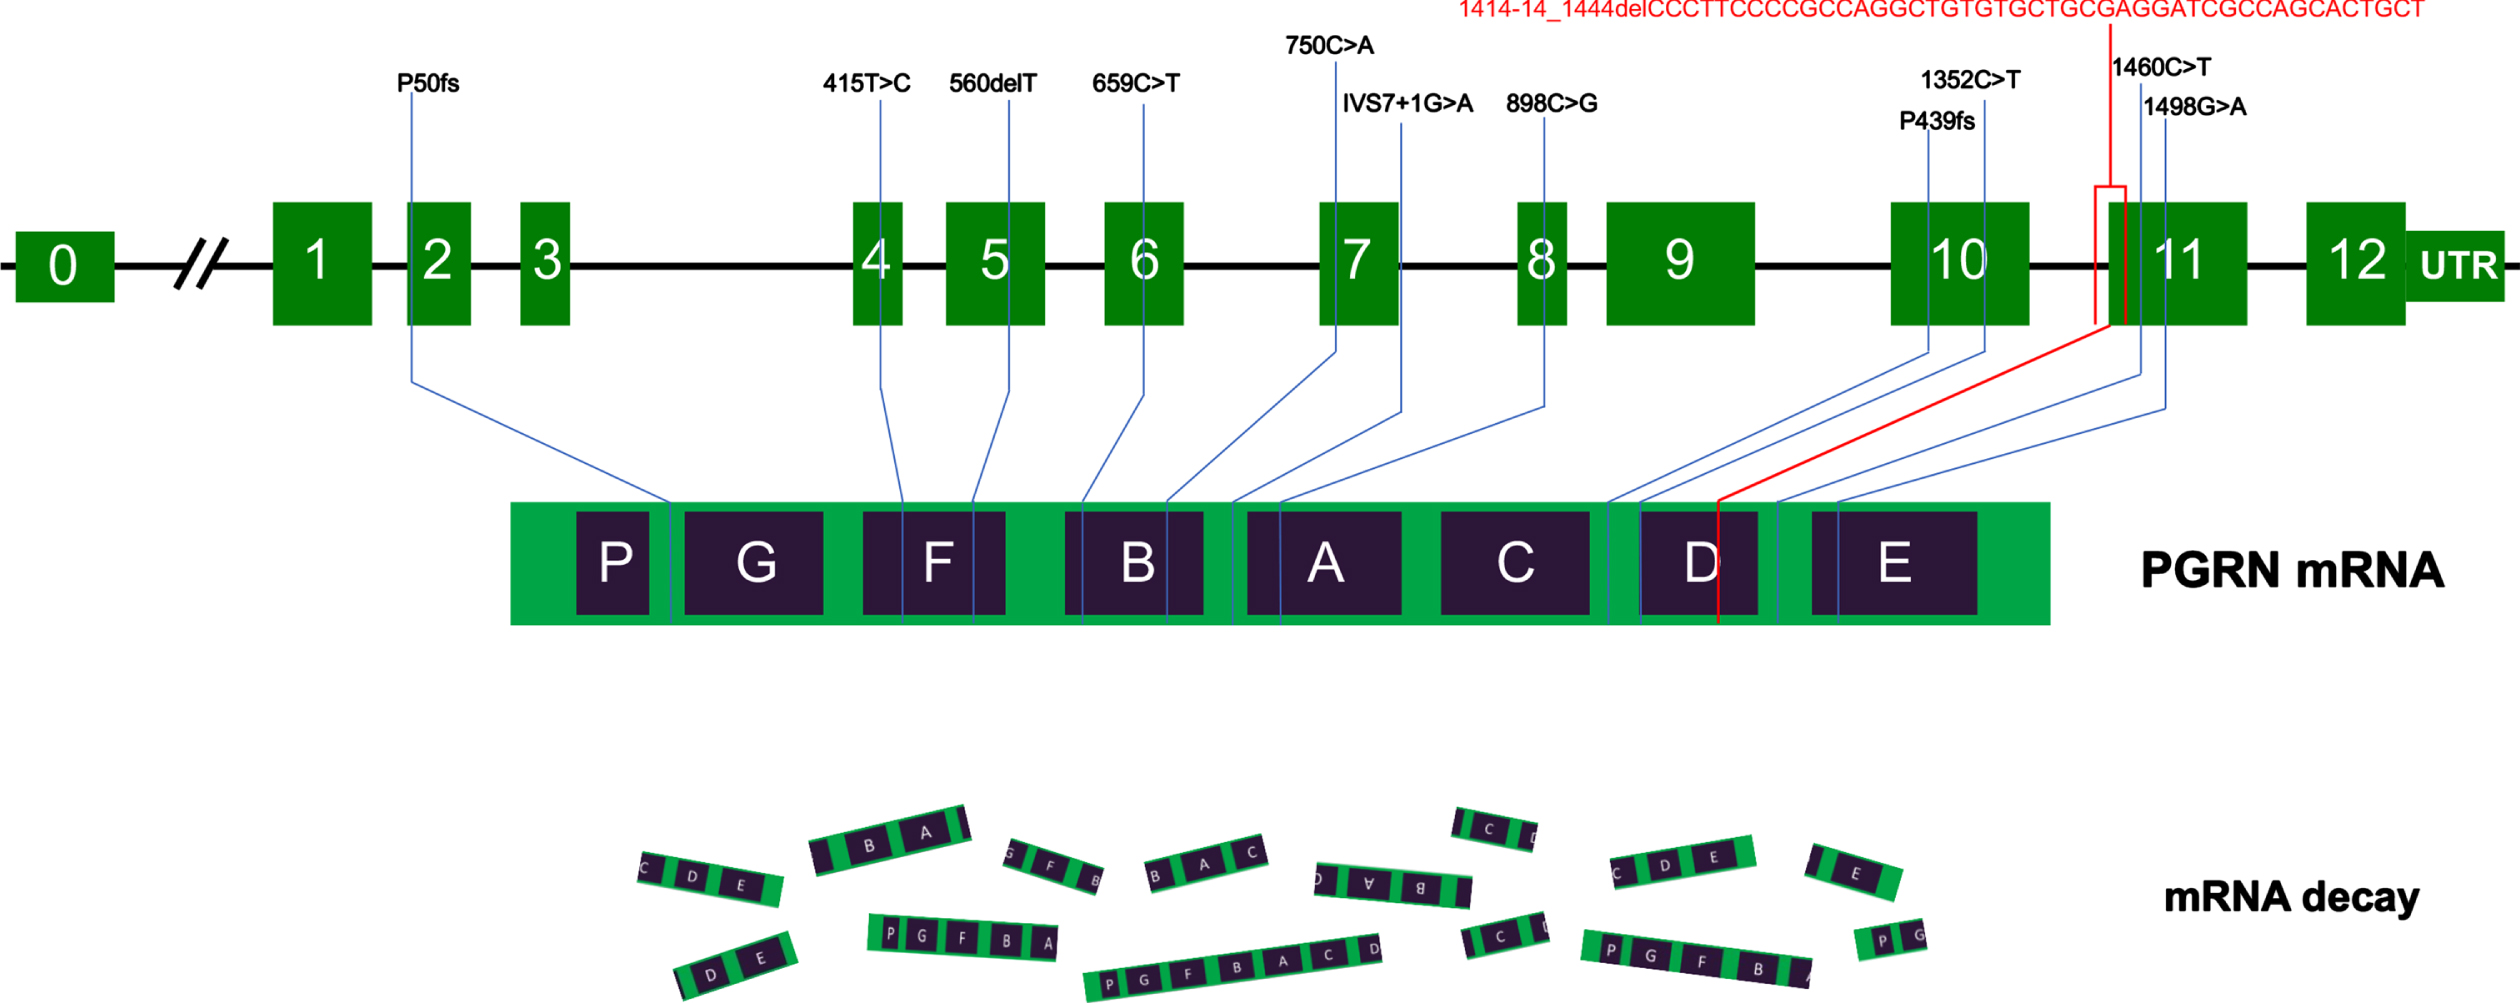 Schematic representation of GRN mutations in China. The schematic representation of the 12 coding exons (green boxes) and UTR of GRN shows all pathogenic mutations identified in Chinese patients reported to date. Most of the mutations cause premature termination of the coding sequence, leading to the degradation of the mutant GRN mRNA by nonsense-mediated decay. The c.1414-14_1444del mutation identified in this study is indicated in red.